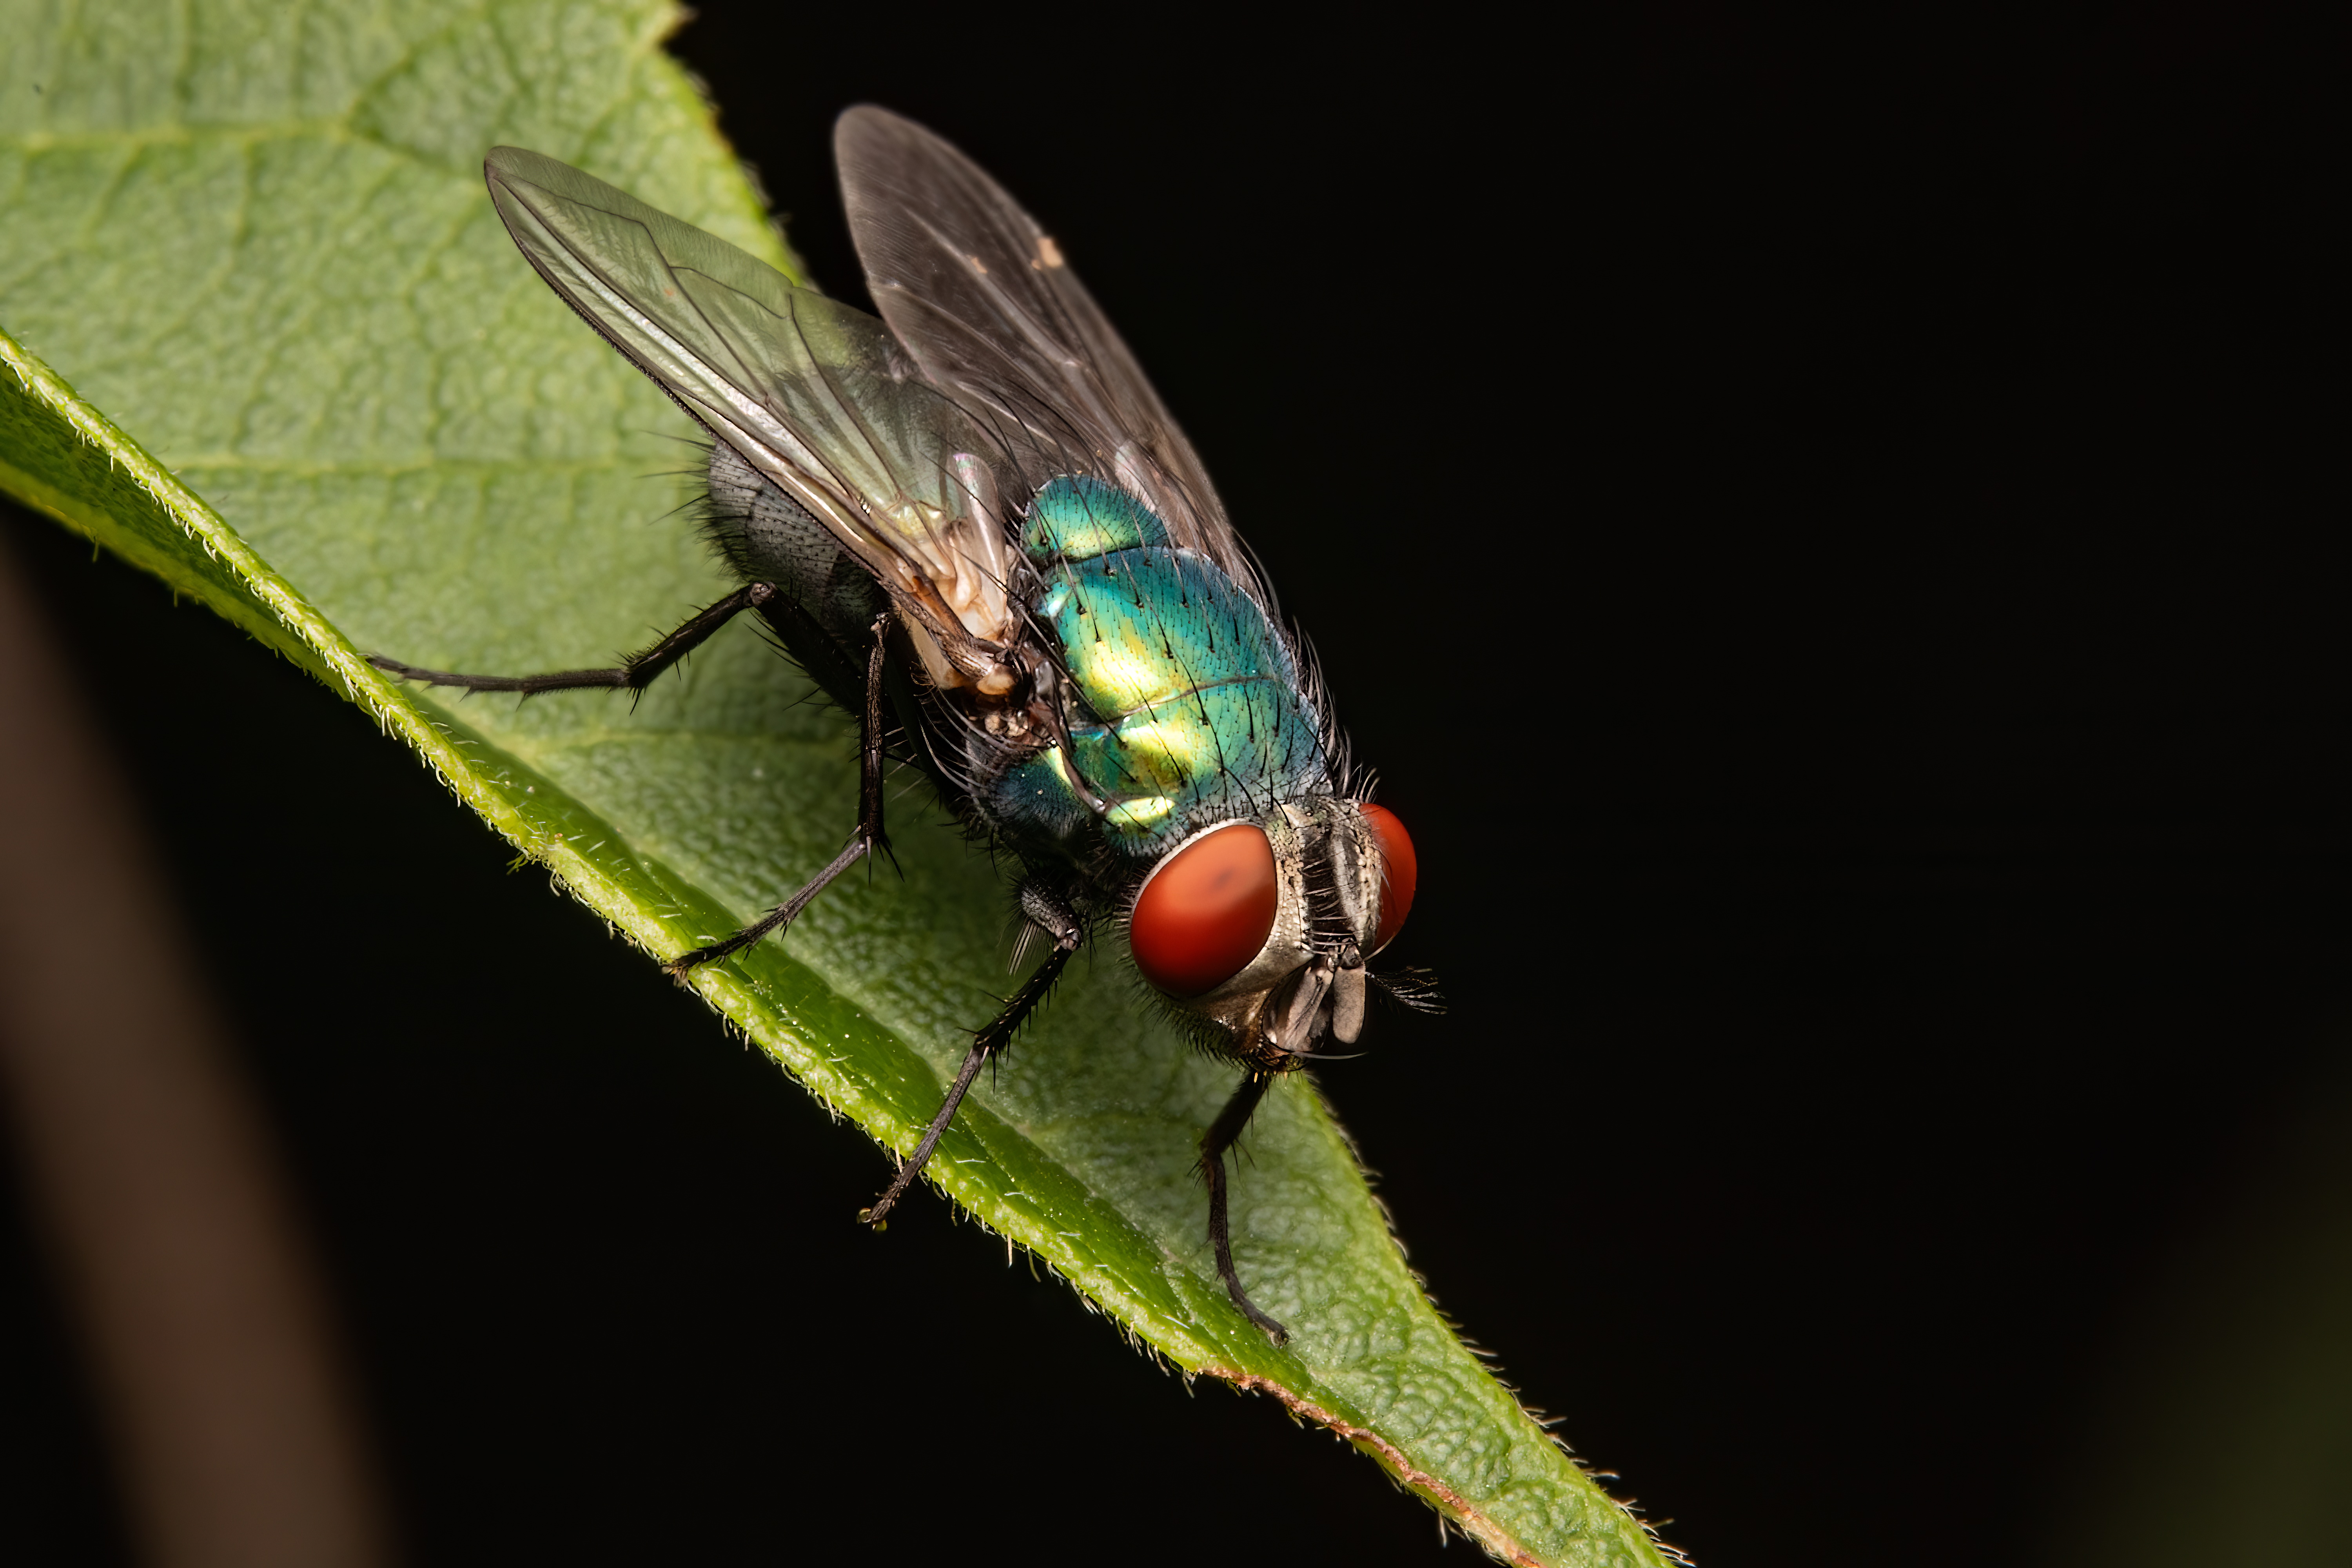 fly, diptera, insect, insectphoto, insectmacro, insectlovers, macrophoto, macrophotography, nature, enthomology, Stephane